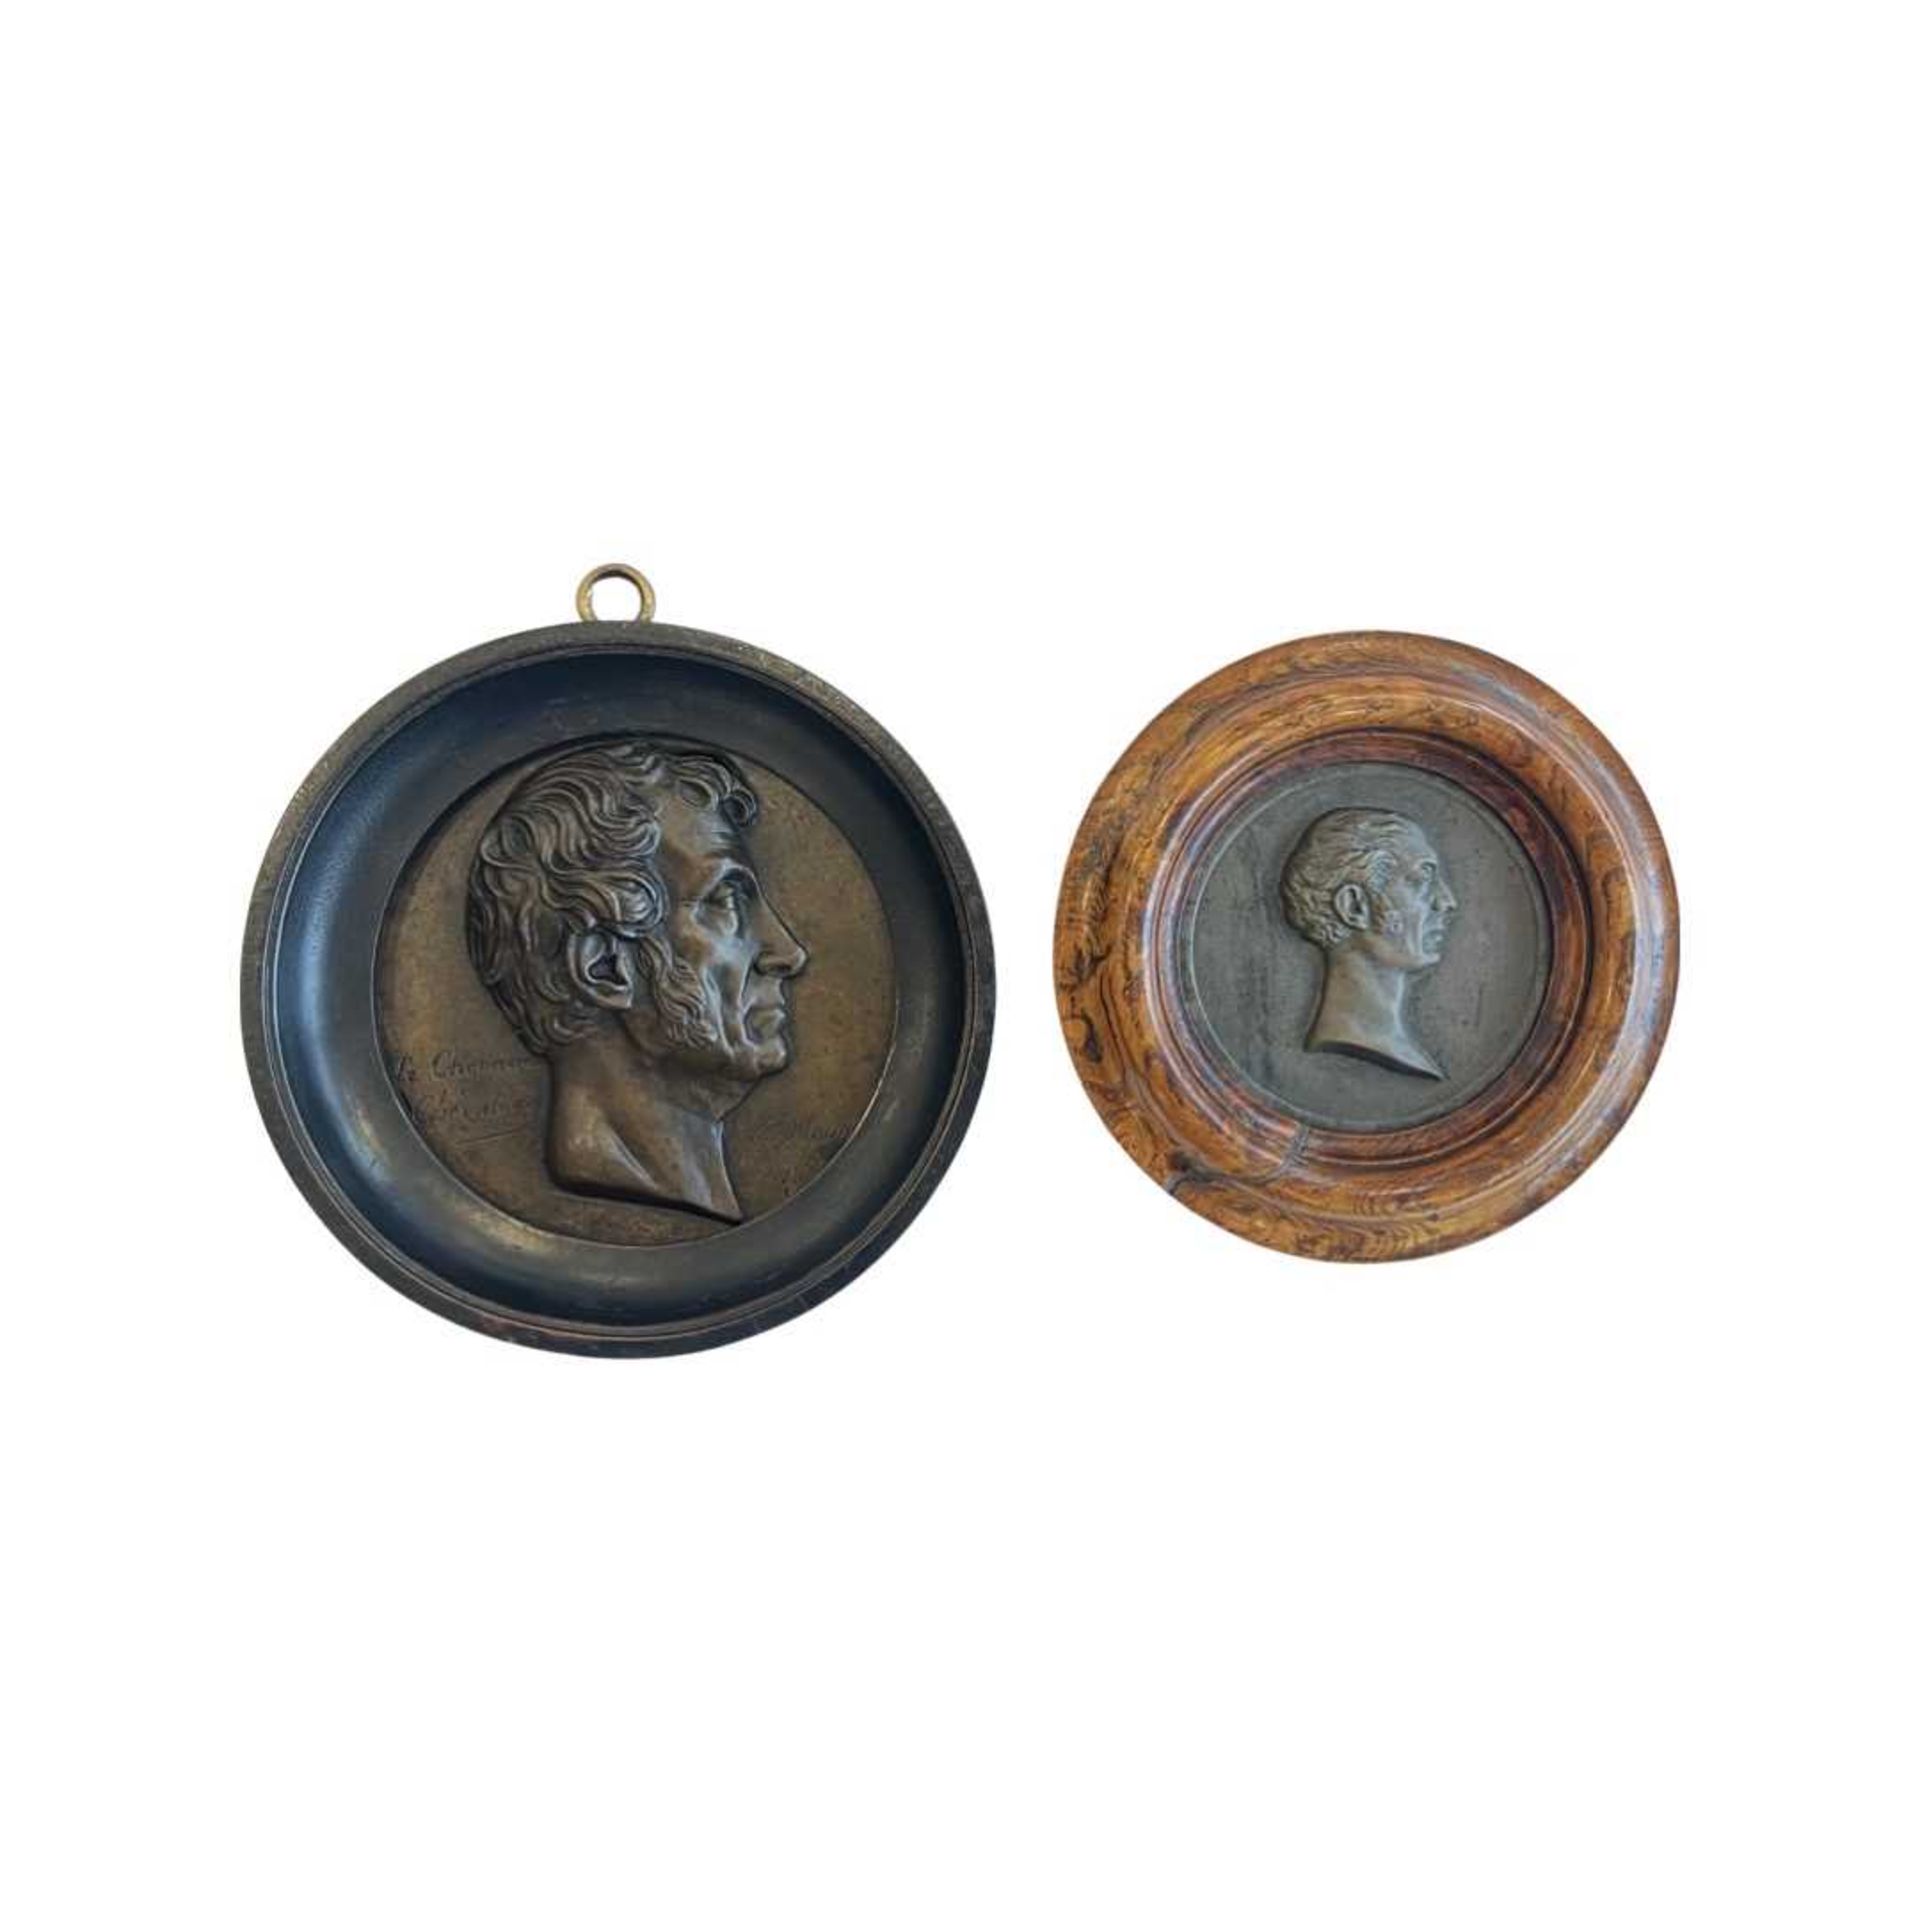 TWO 19TH CENTURY FRENCH BRONZE PORTRAIT MEDALLIONS